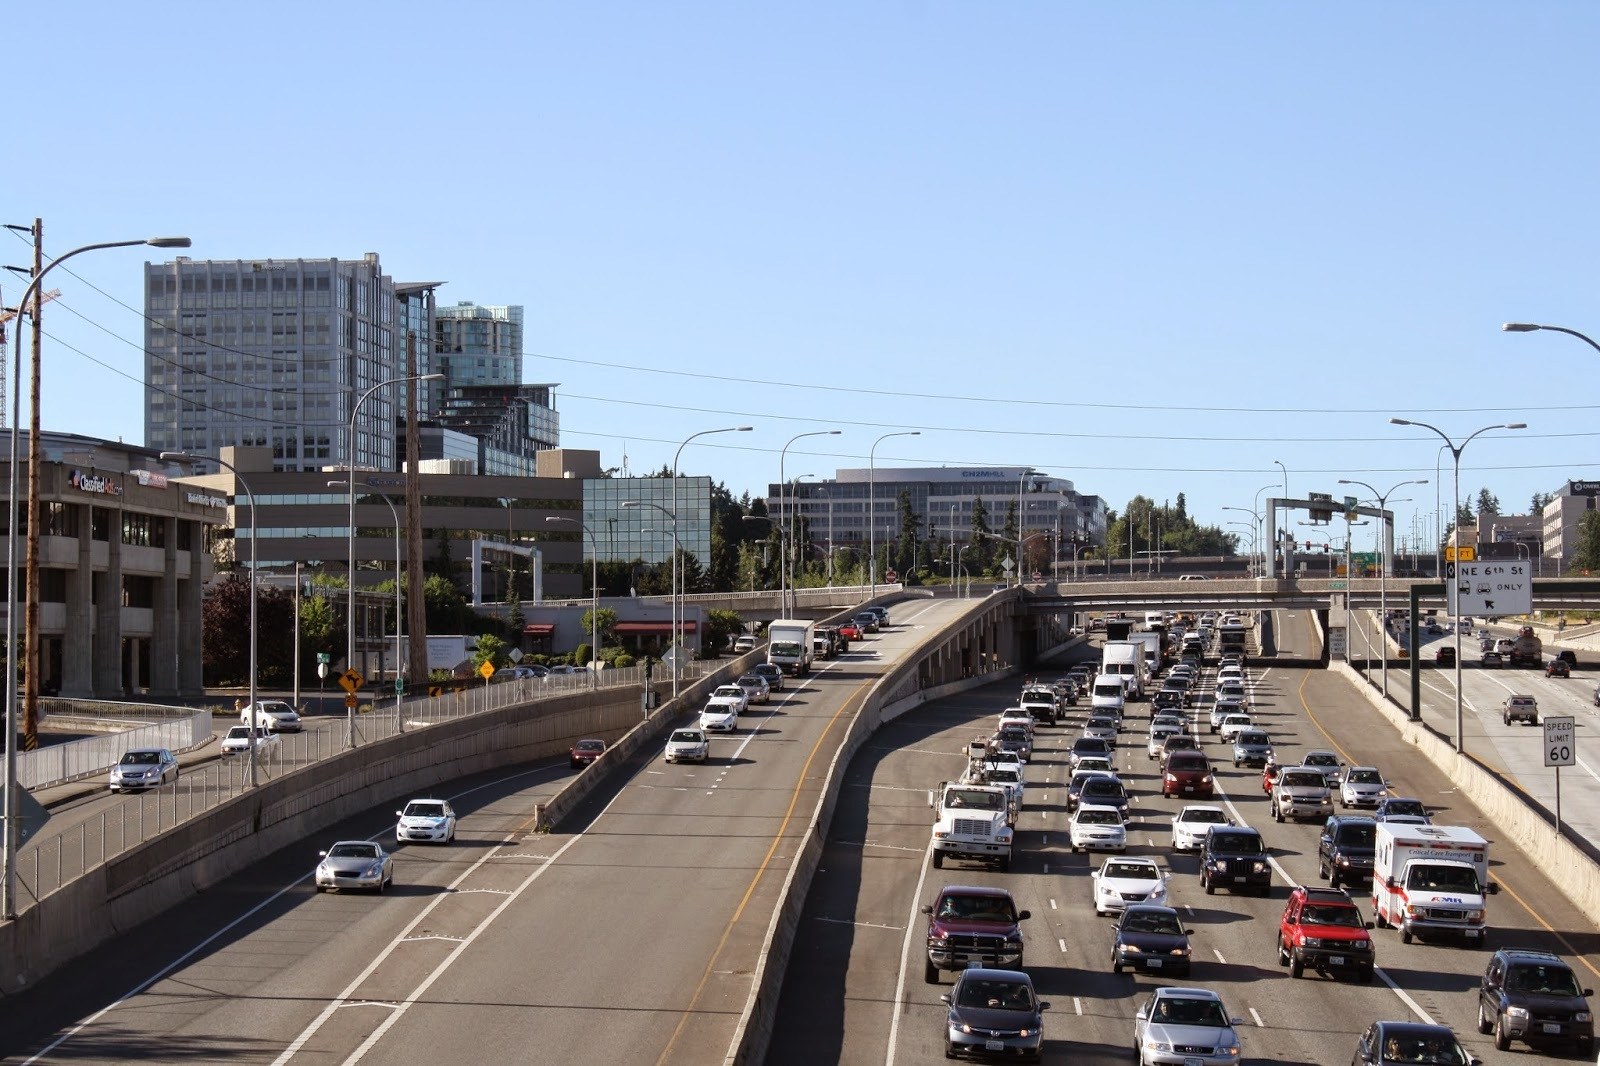 The Washington State Department of Transportation will host two neighborhood open houses in early September to provide updates on the I-405 Renton to Bellevue Widening and Express Toll Lanes project. Photo courtesy of WSDOT